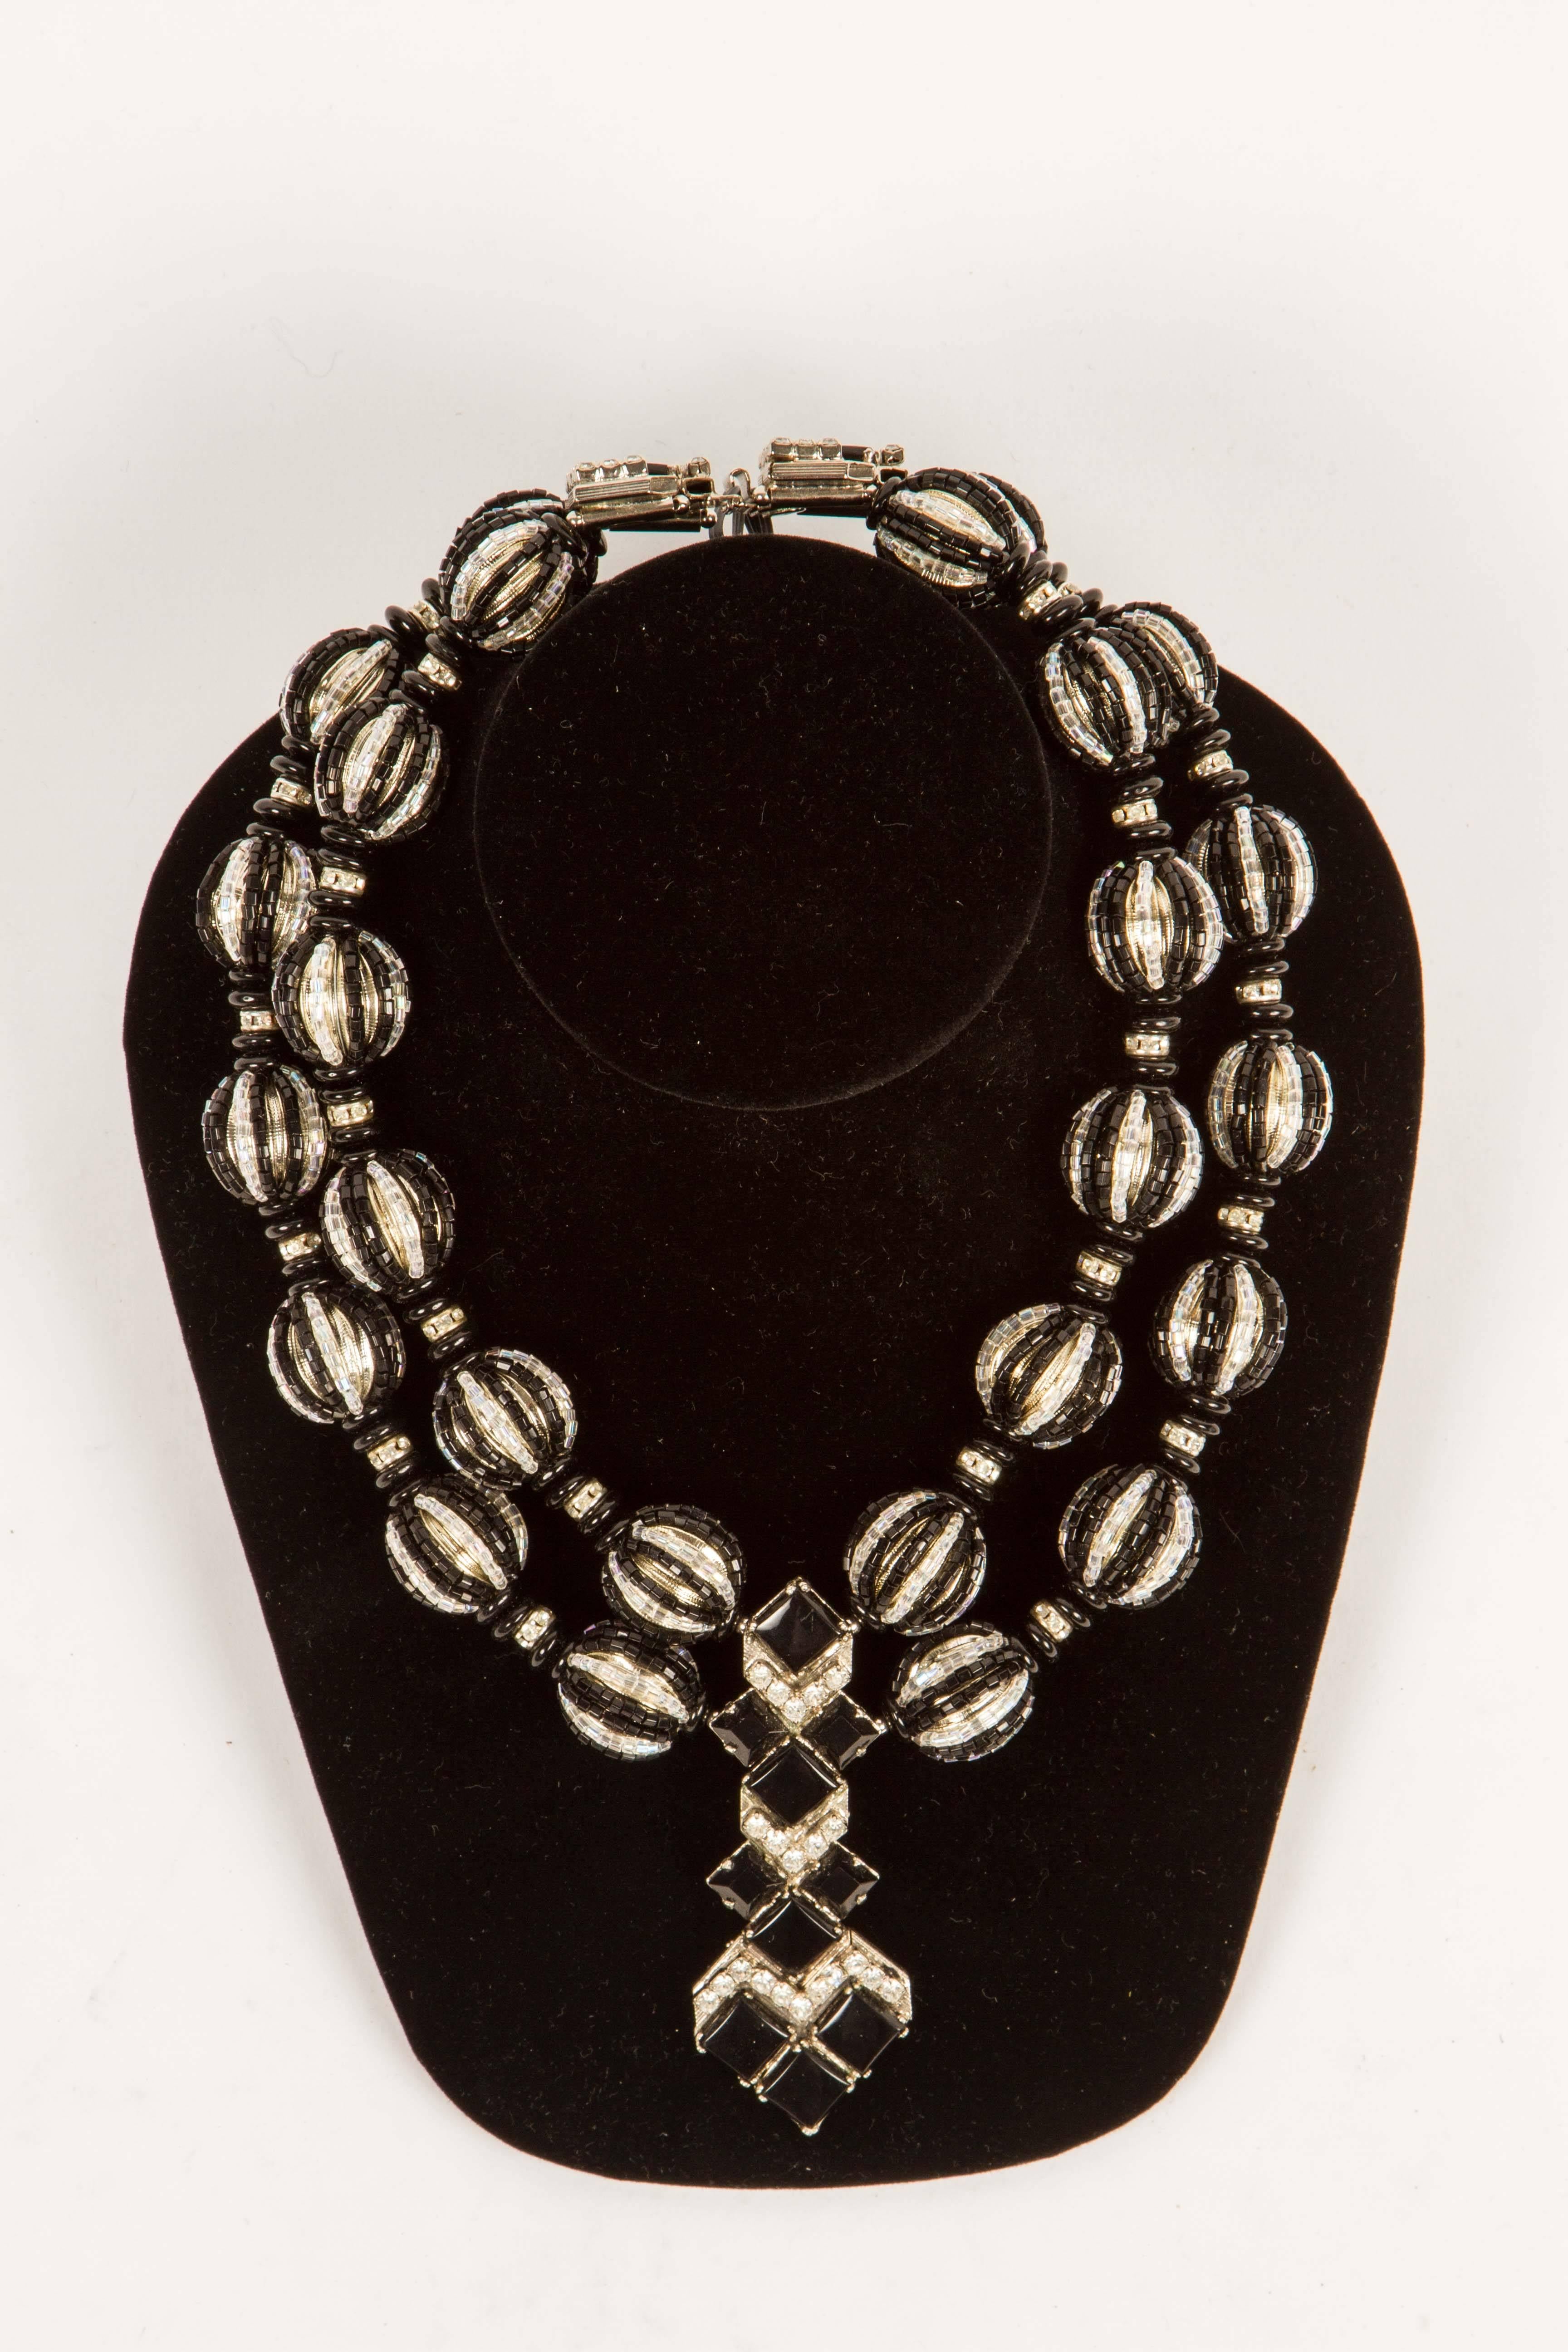 A real showstopper, this Art Deco inspired necklace, a revival look popular in the 1970's, with the look of onyx and crystal set in silvered metal.  Round metal beads are covered in both black and clear crystal beads and there are rhinestones